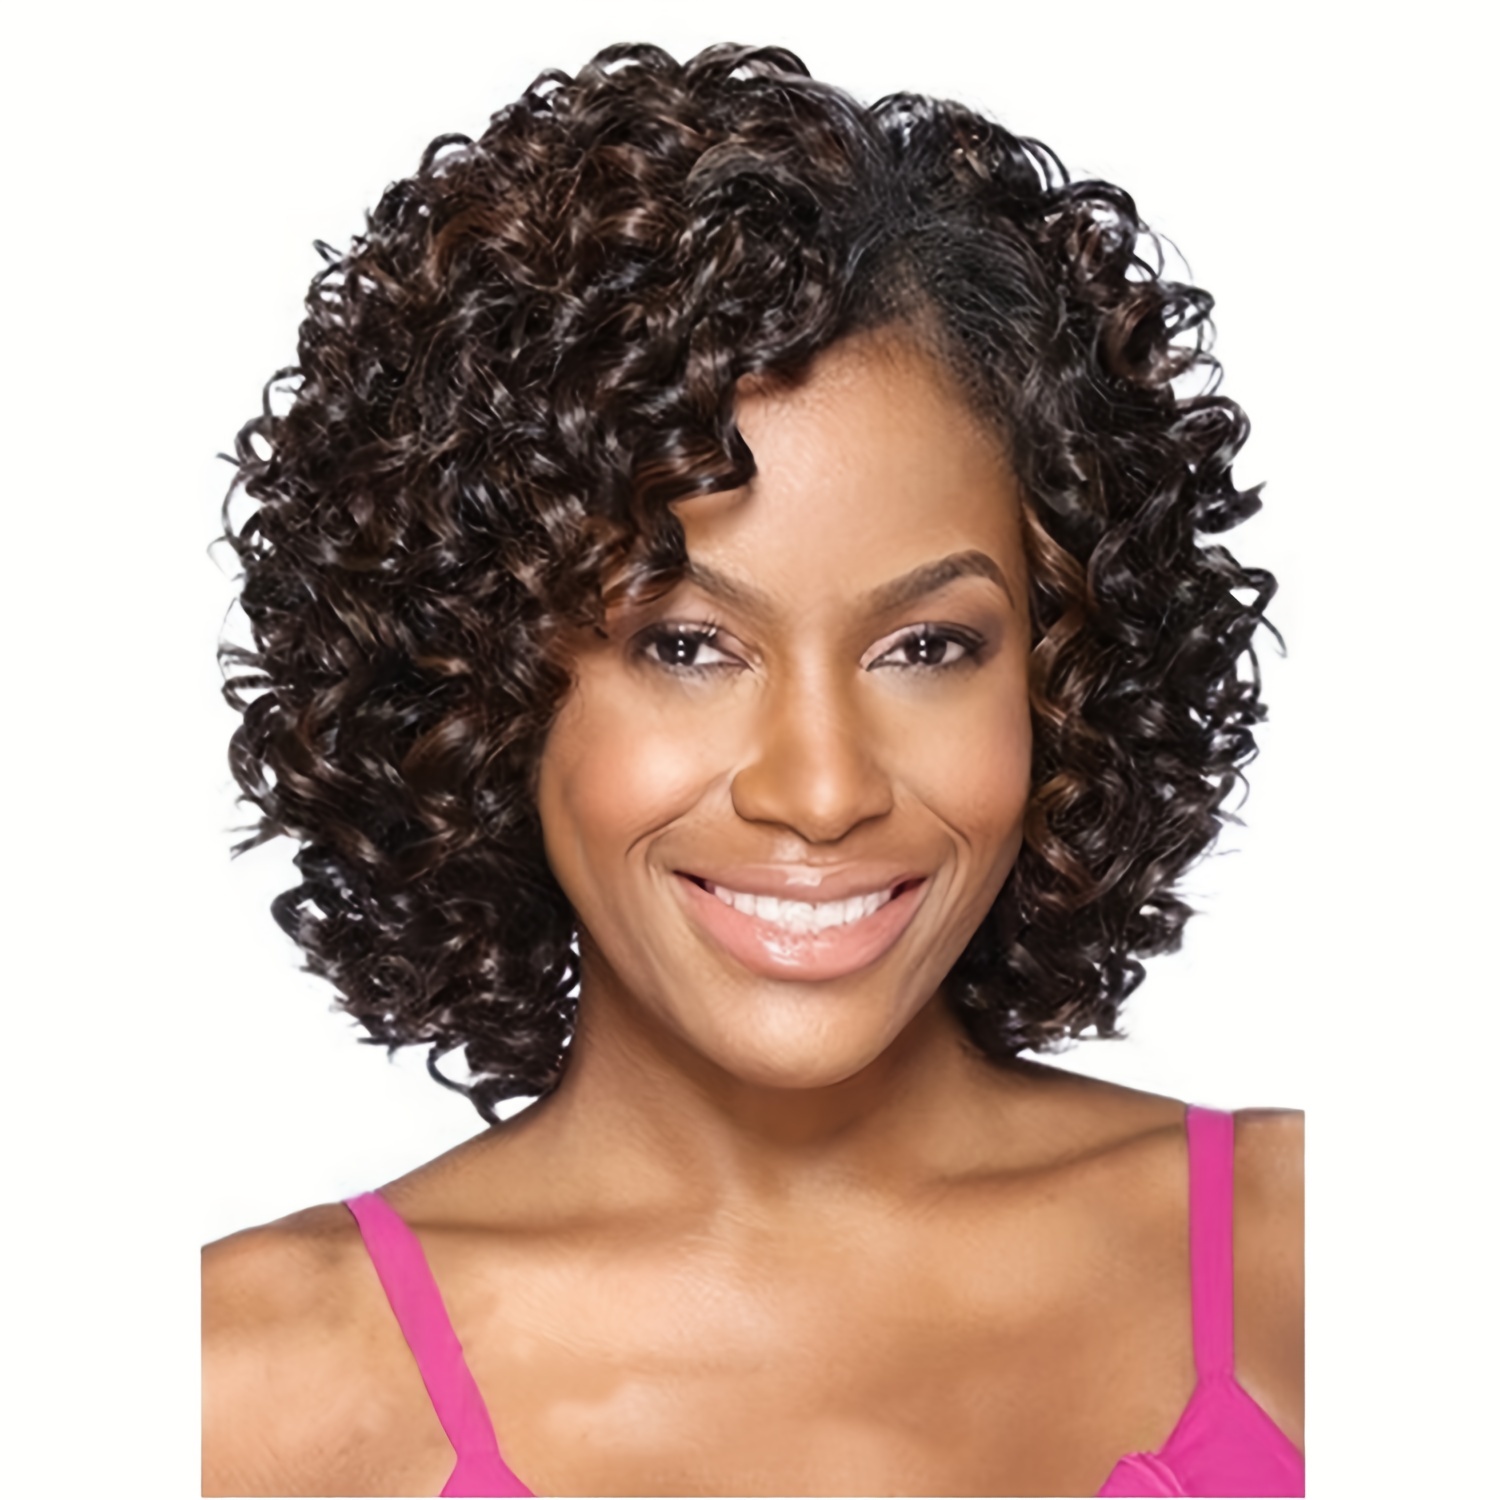 12 Inch Brown Curly Wigs | Heat Resistant Synthetic Fiber Hair Replacement